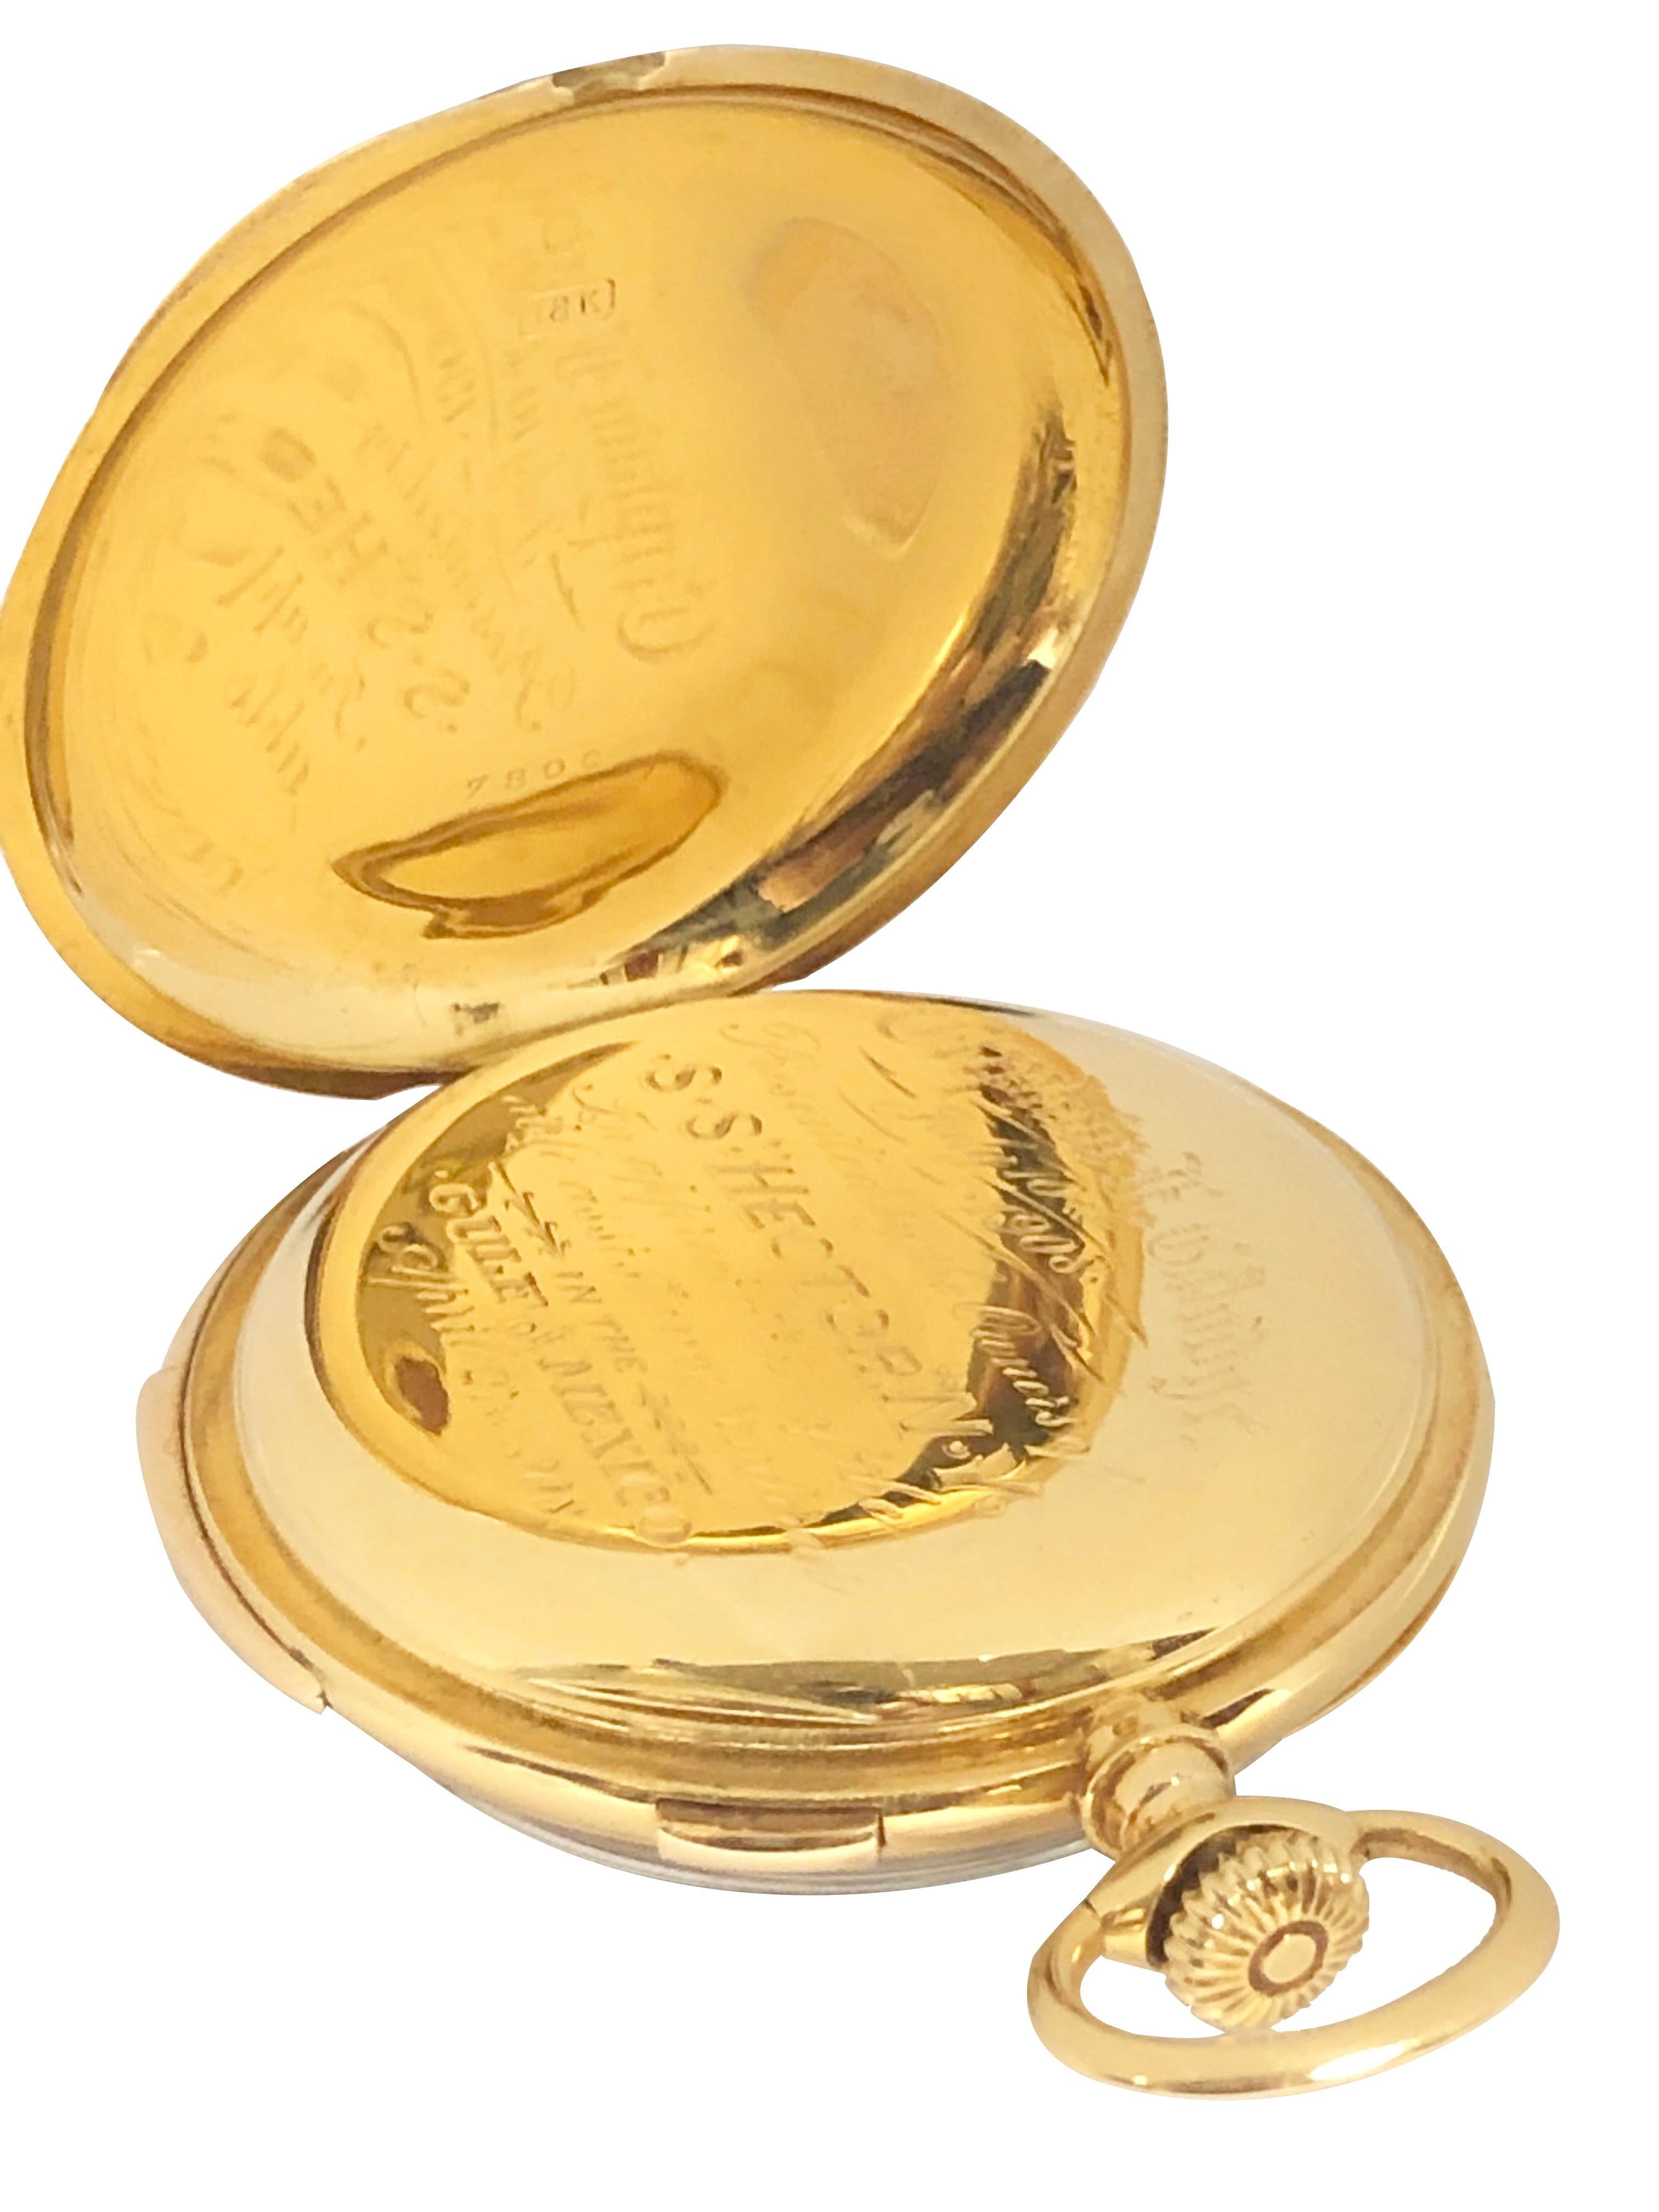 Circa 1908 Audemars Piguet Pocket Watch, 46 M.M. 18K Yellow Gold case with with inside dust cover having an engraved presentation From the owners of the Ship S.S Hector to Captain Dodge for his assistance while at Sea in 1908. A beautiful Jeweled